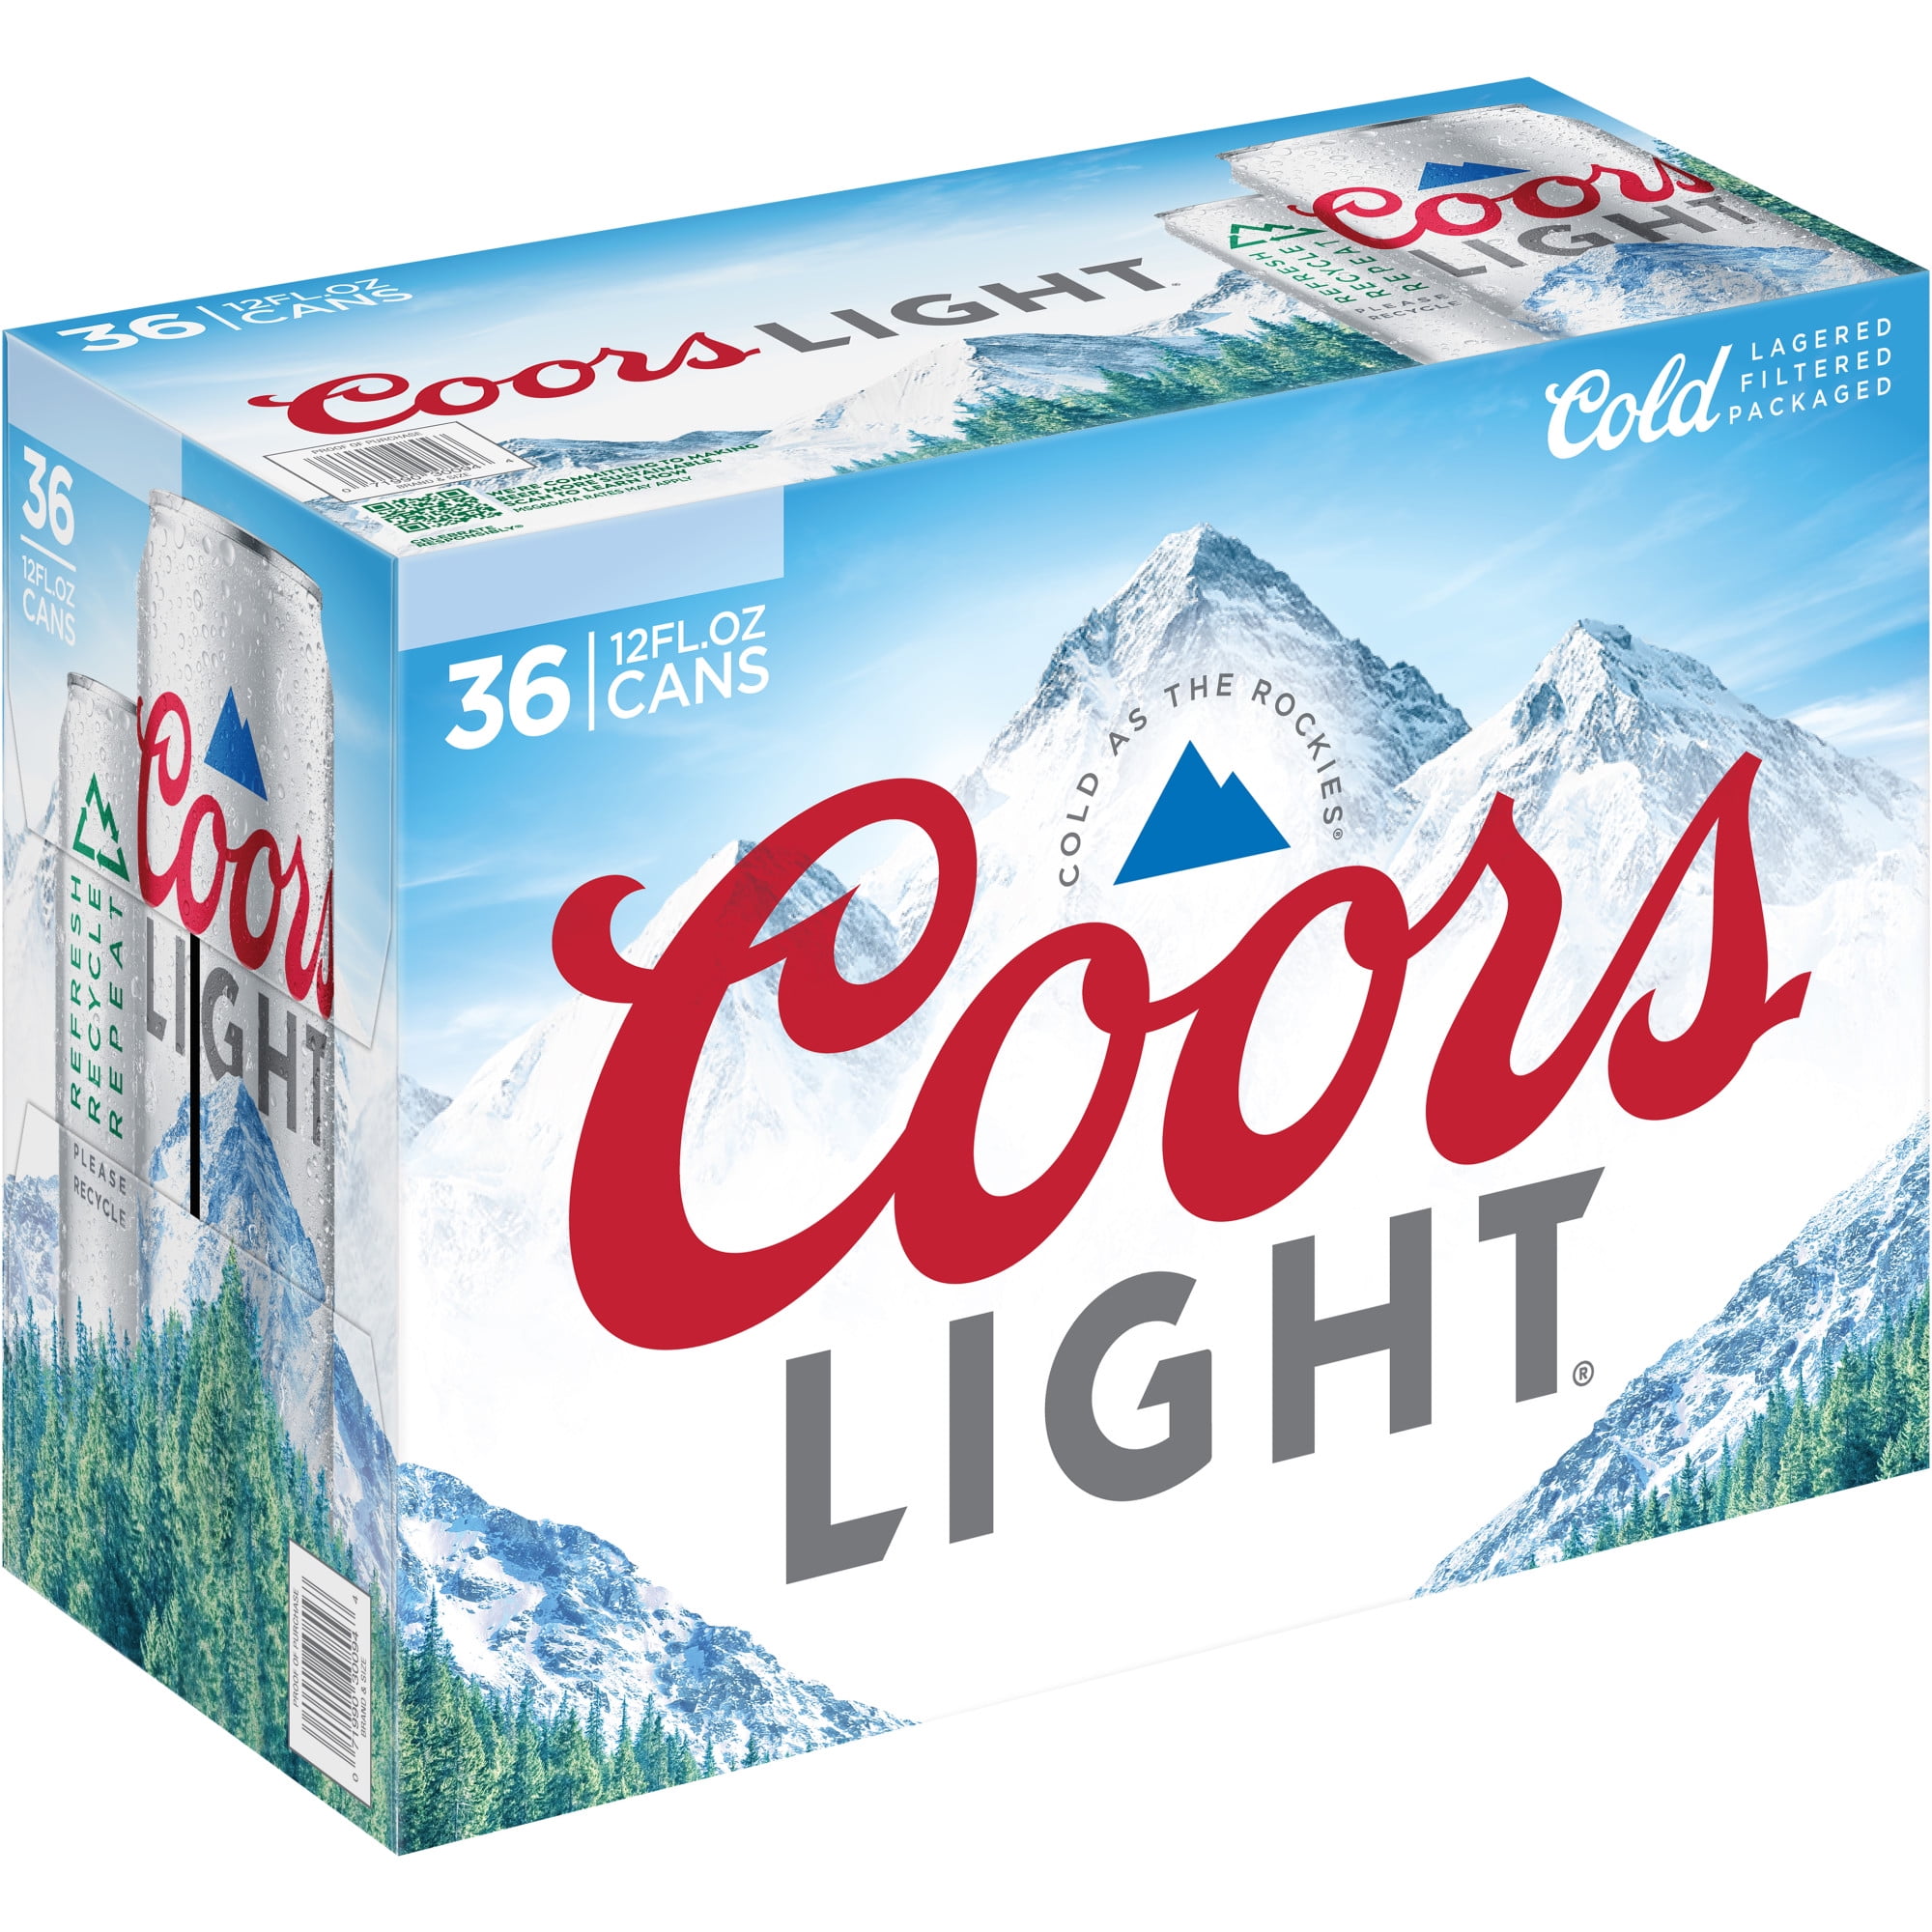 Habits Beer - THEY'RE BACK!!! Coors Light 36 Pack Cooler Bags at Habits!  Only $23.99 +tax.